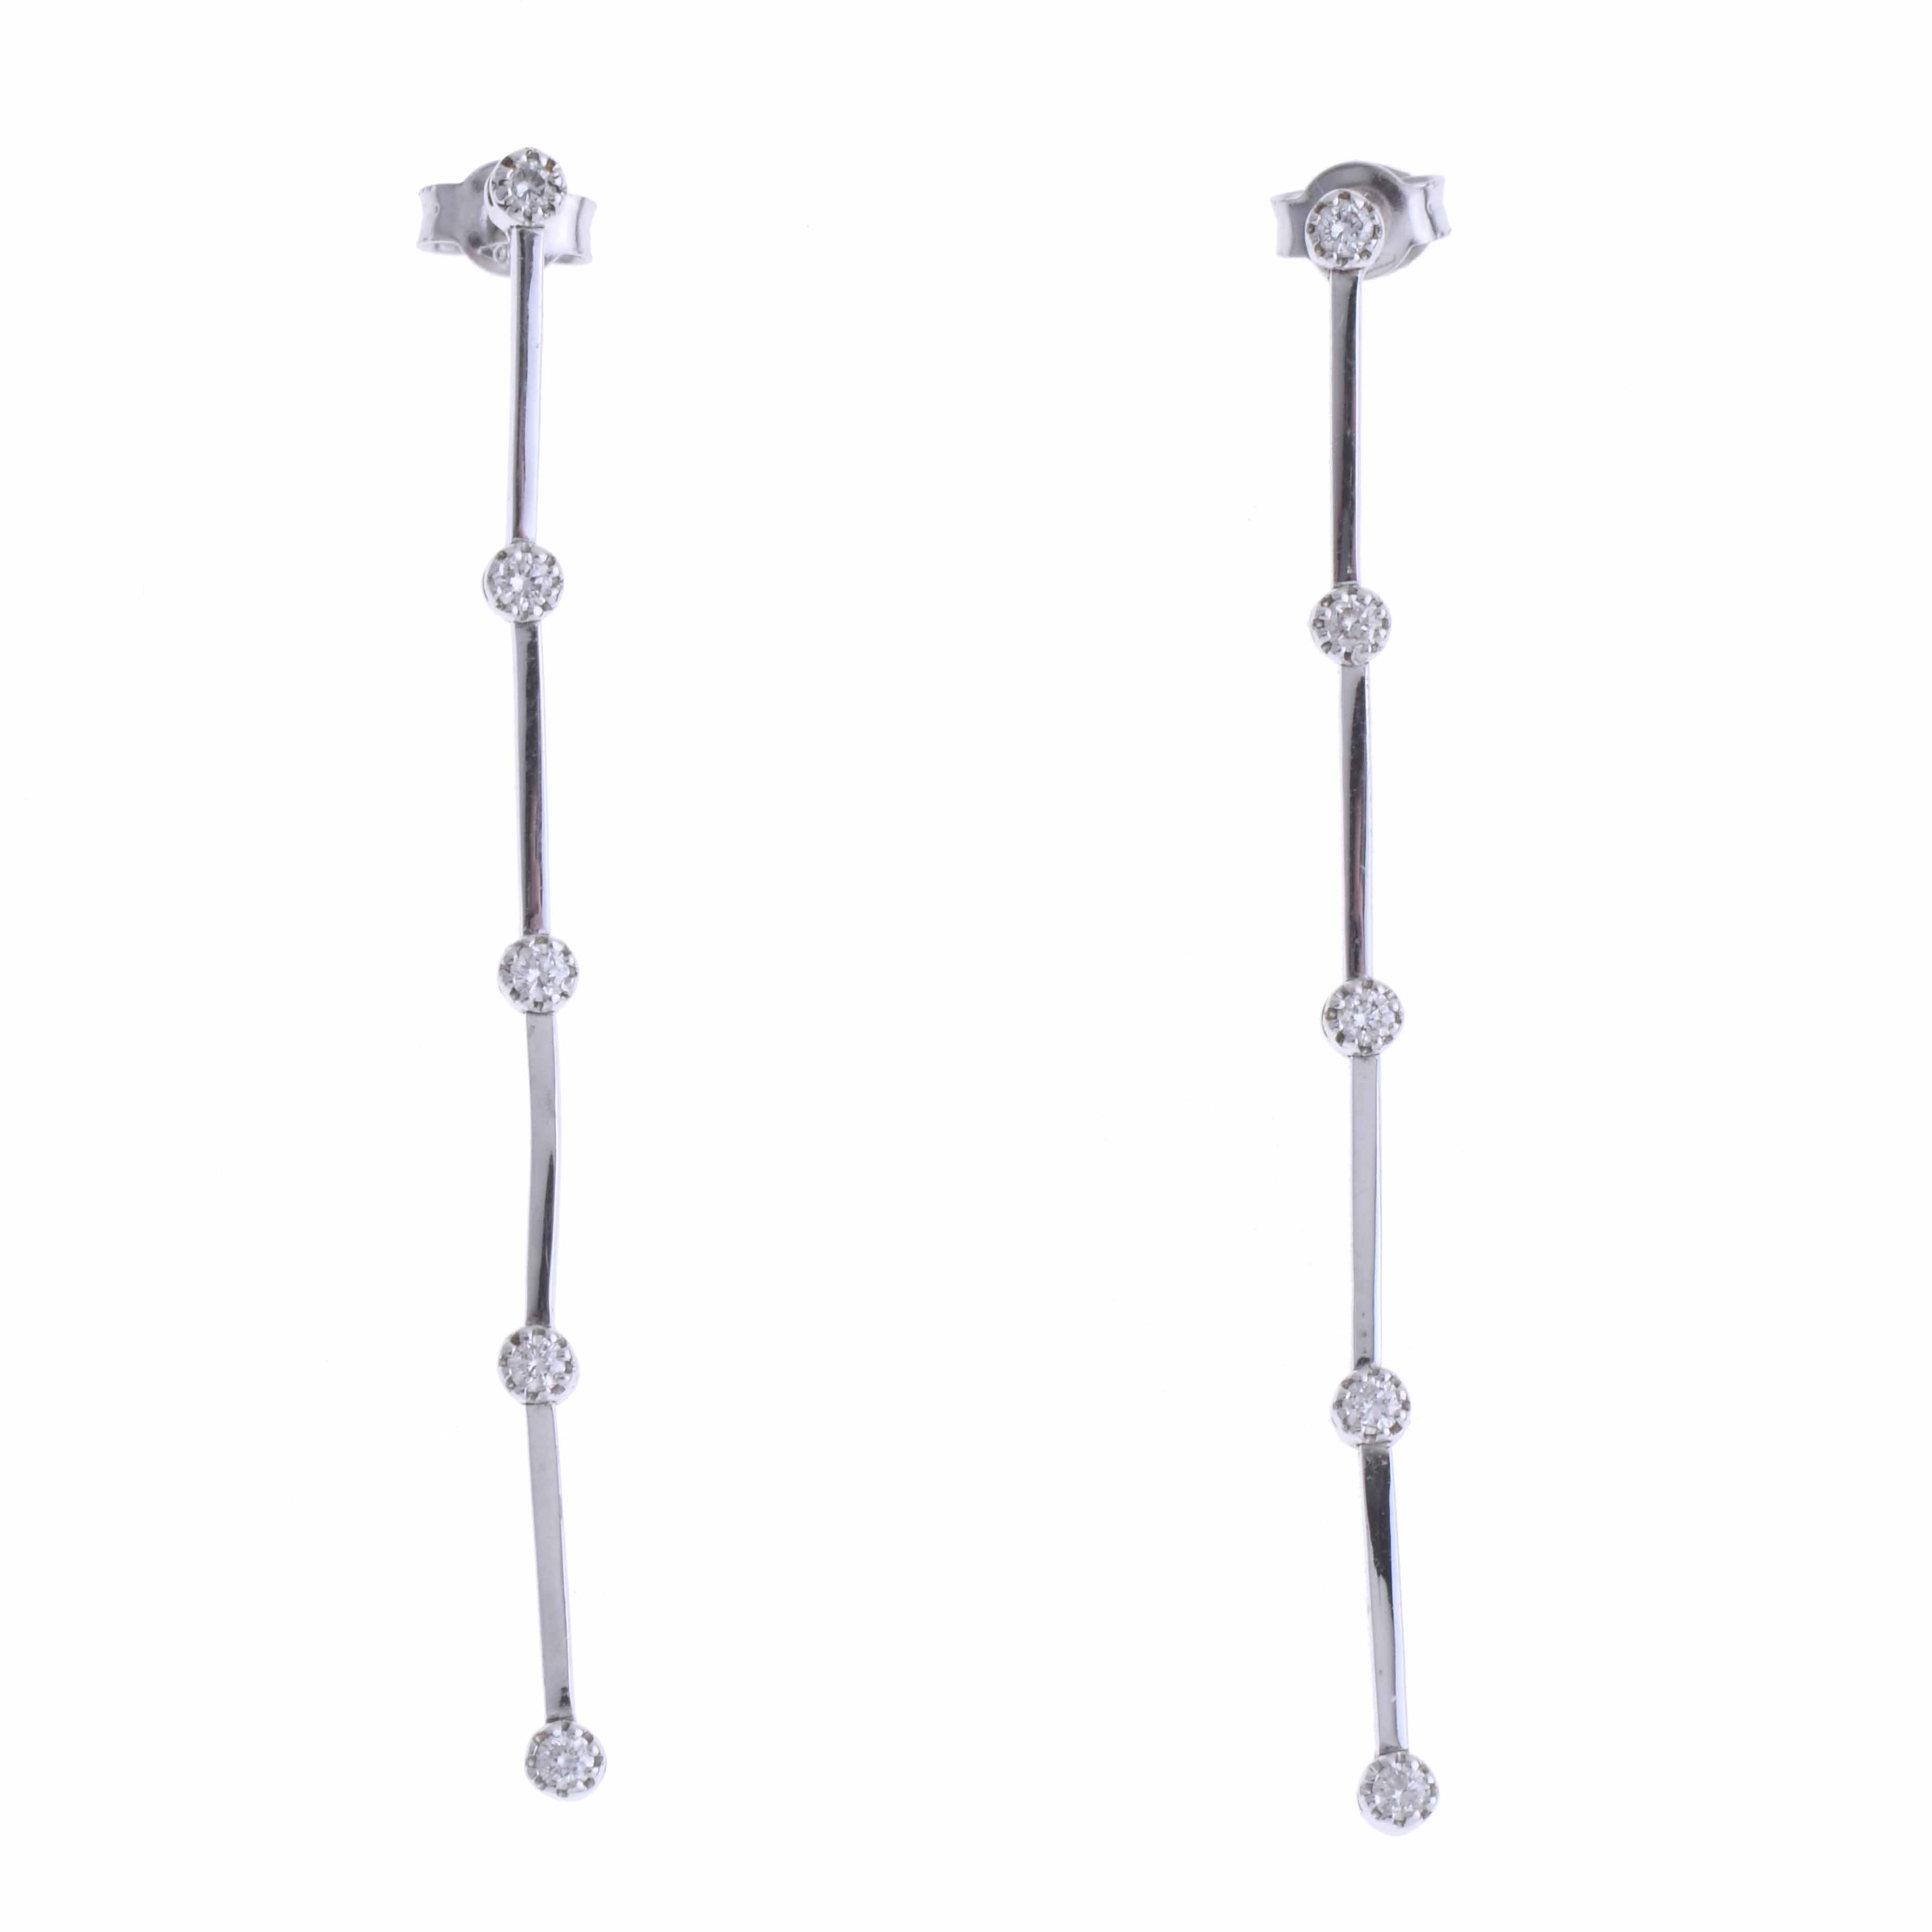 WHITE GOLD AND BRILLIANTS LONG EARRINGS.